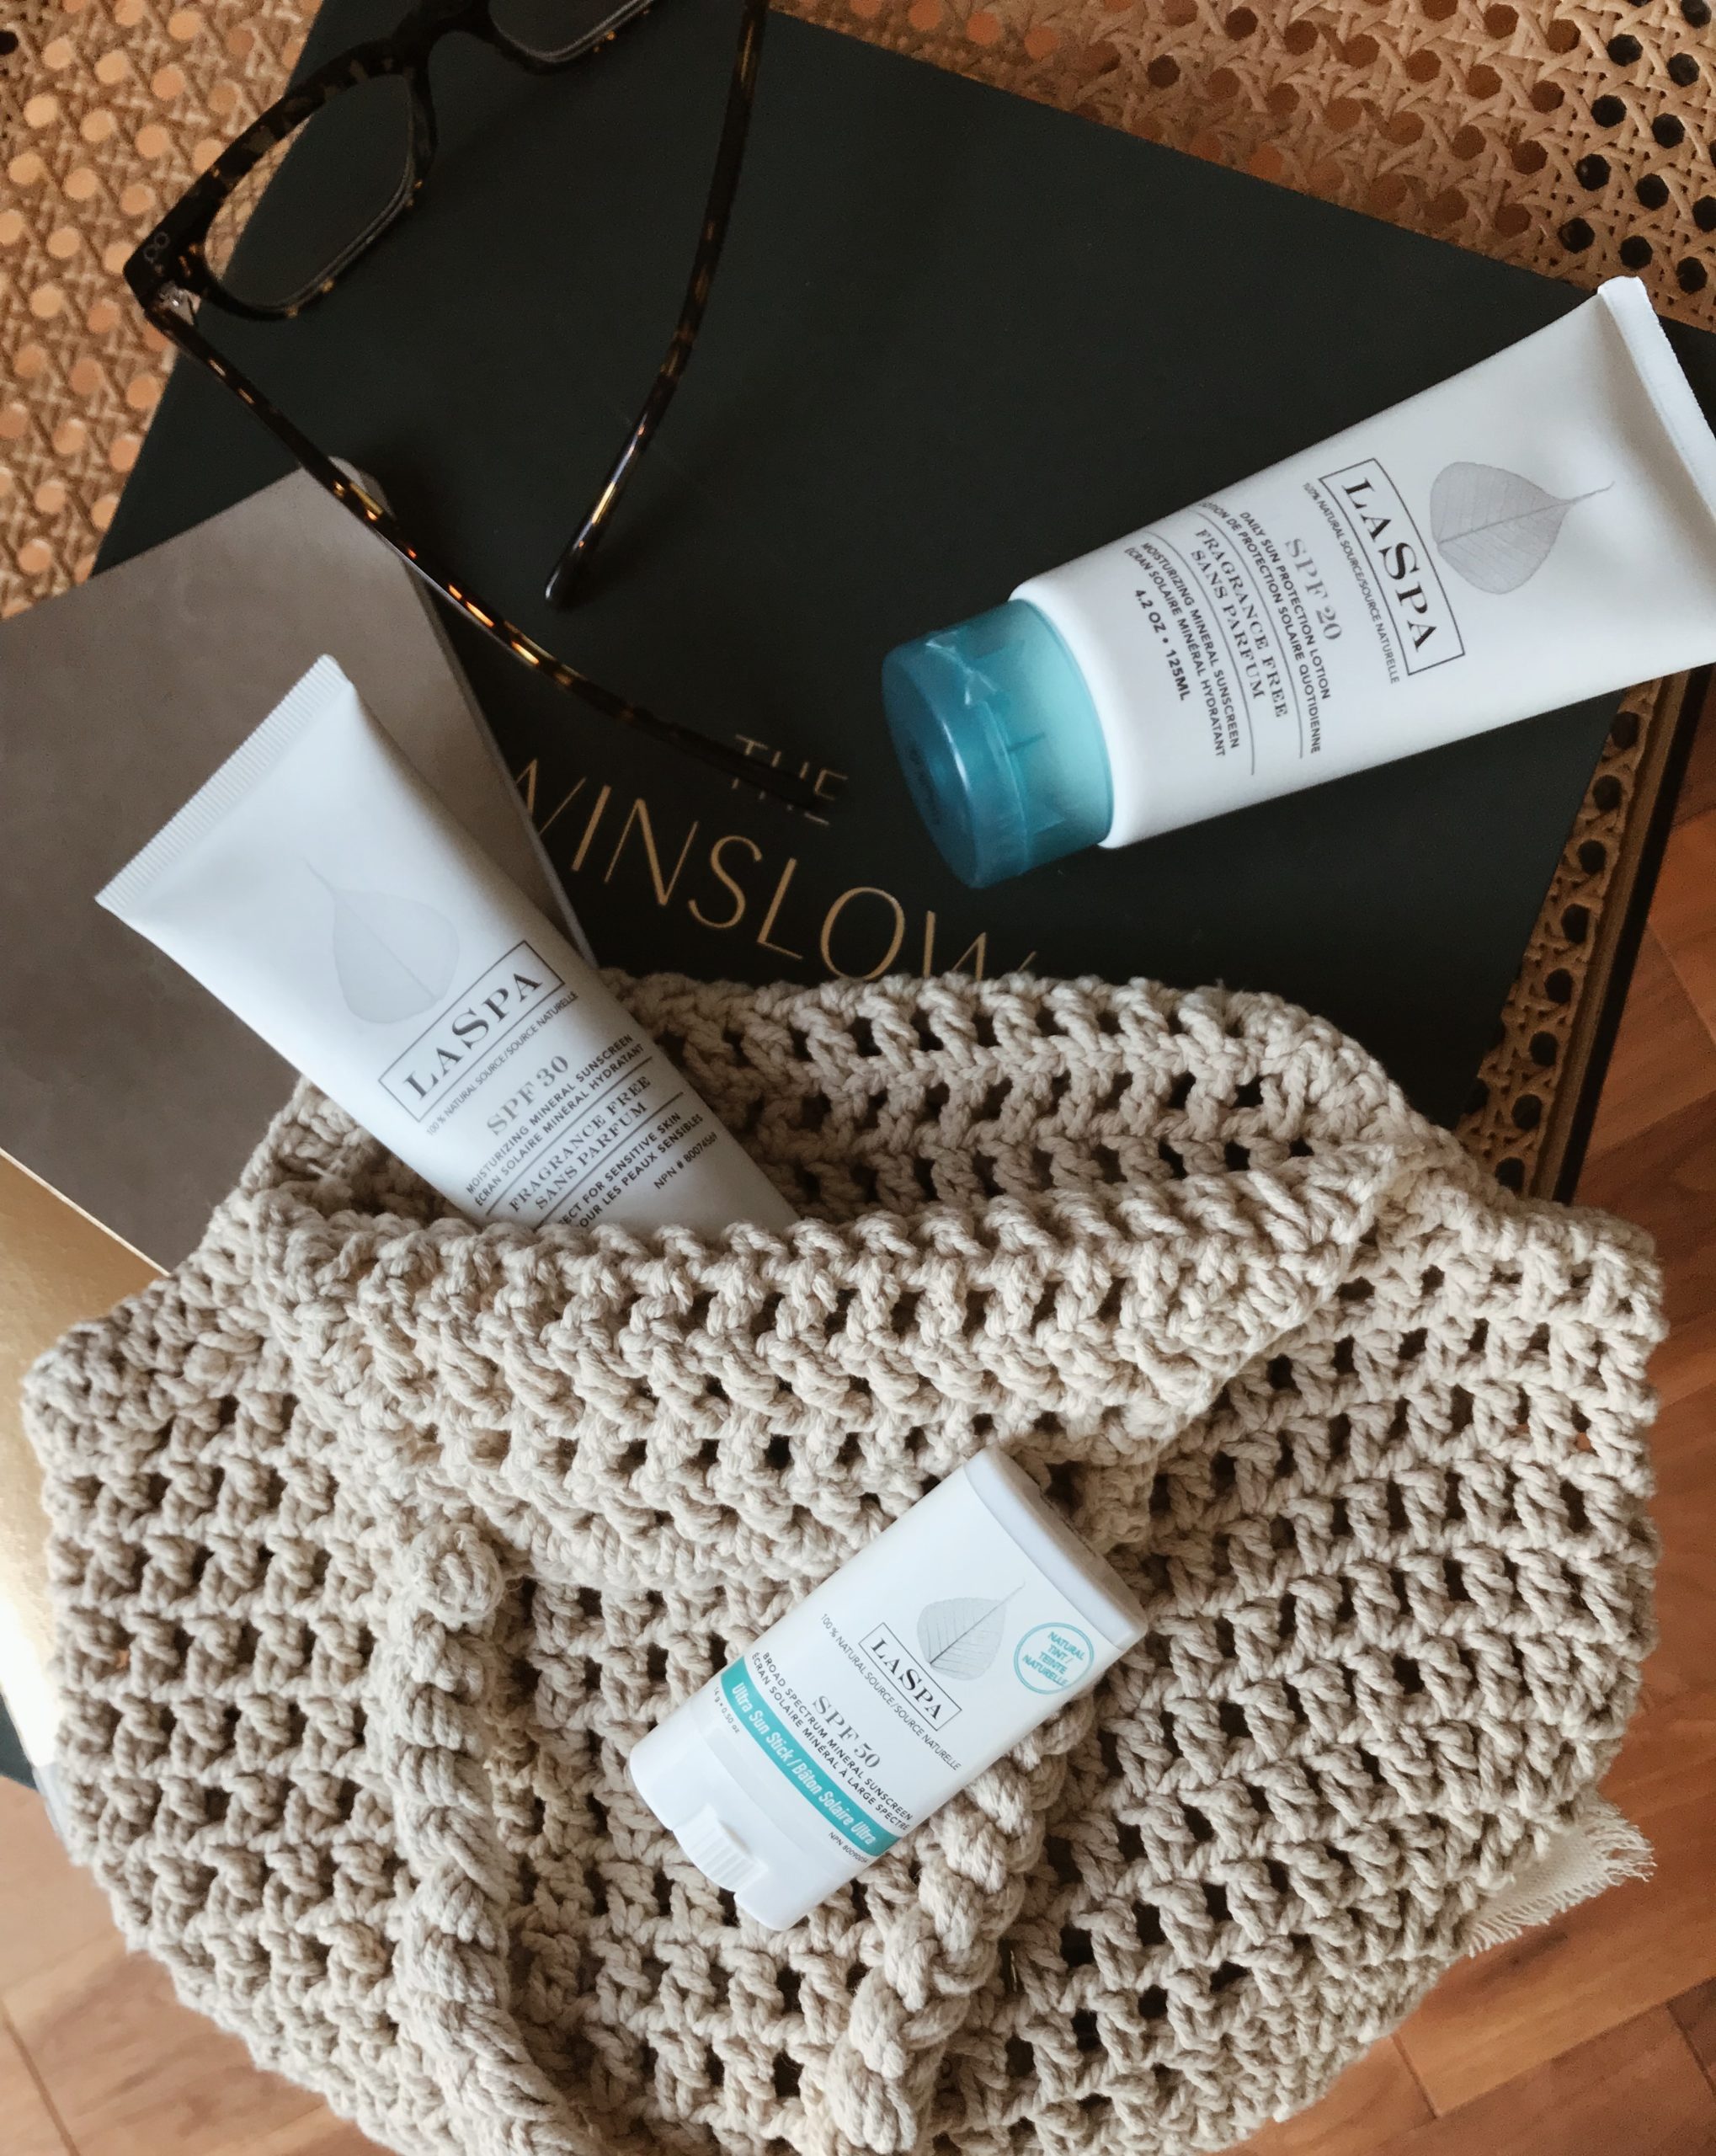 Three white bottles of LASPA Mineral SPF Sunscreen products on a table with a beige bag, a black book and sunglasses.